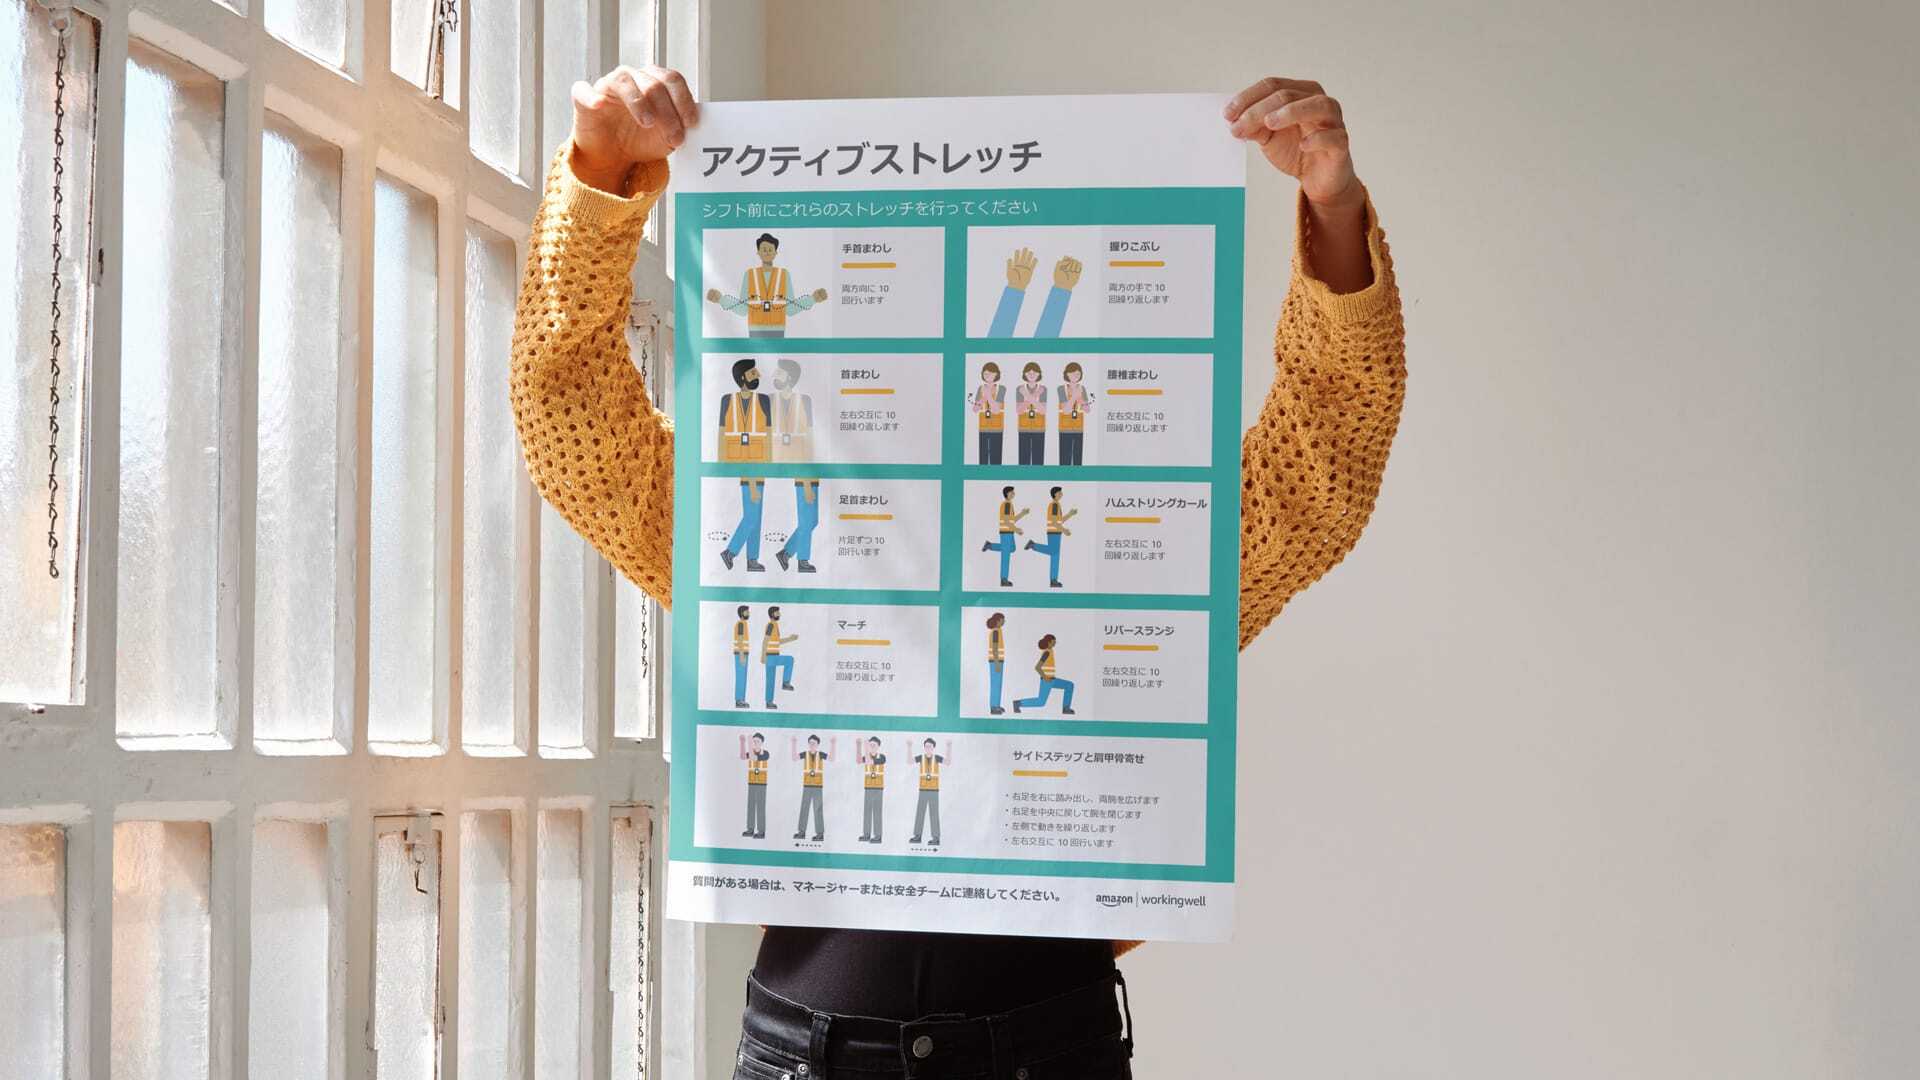 An image of someone holding a poster with japanese translation